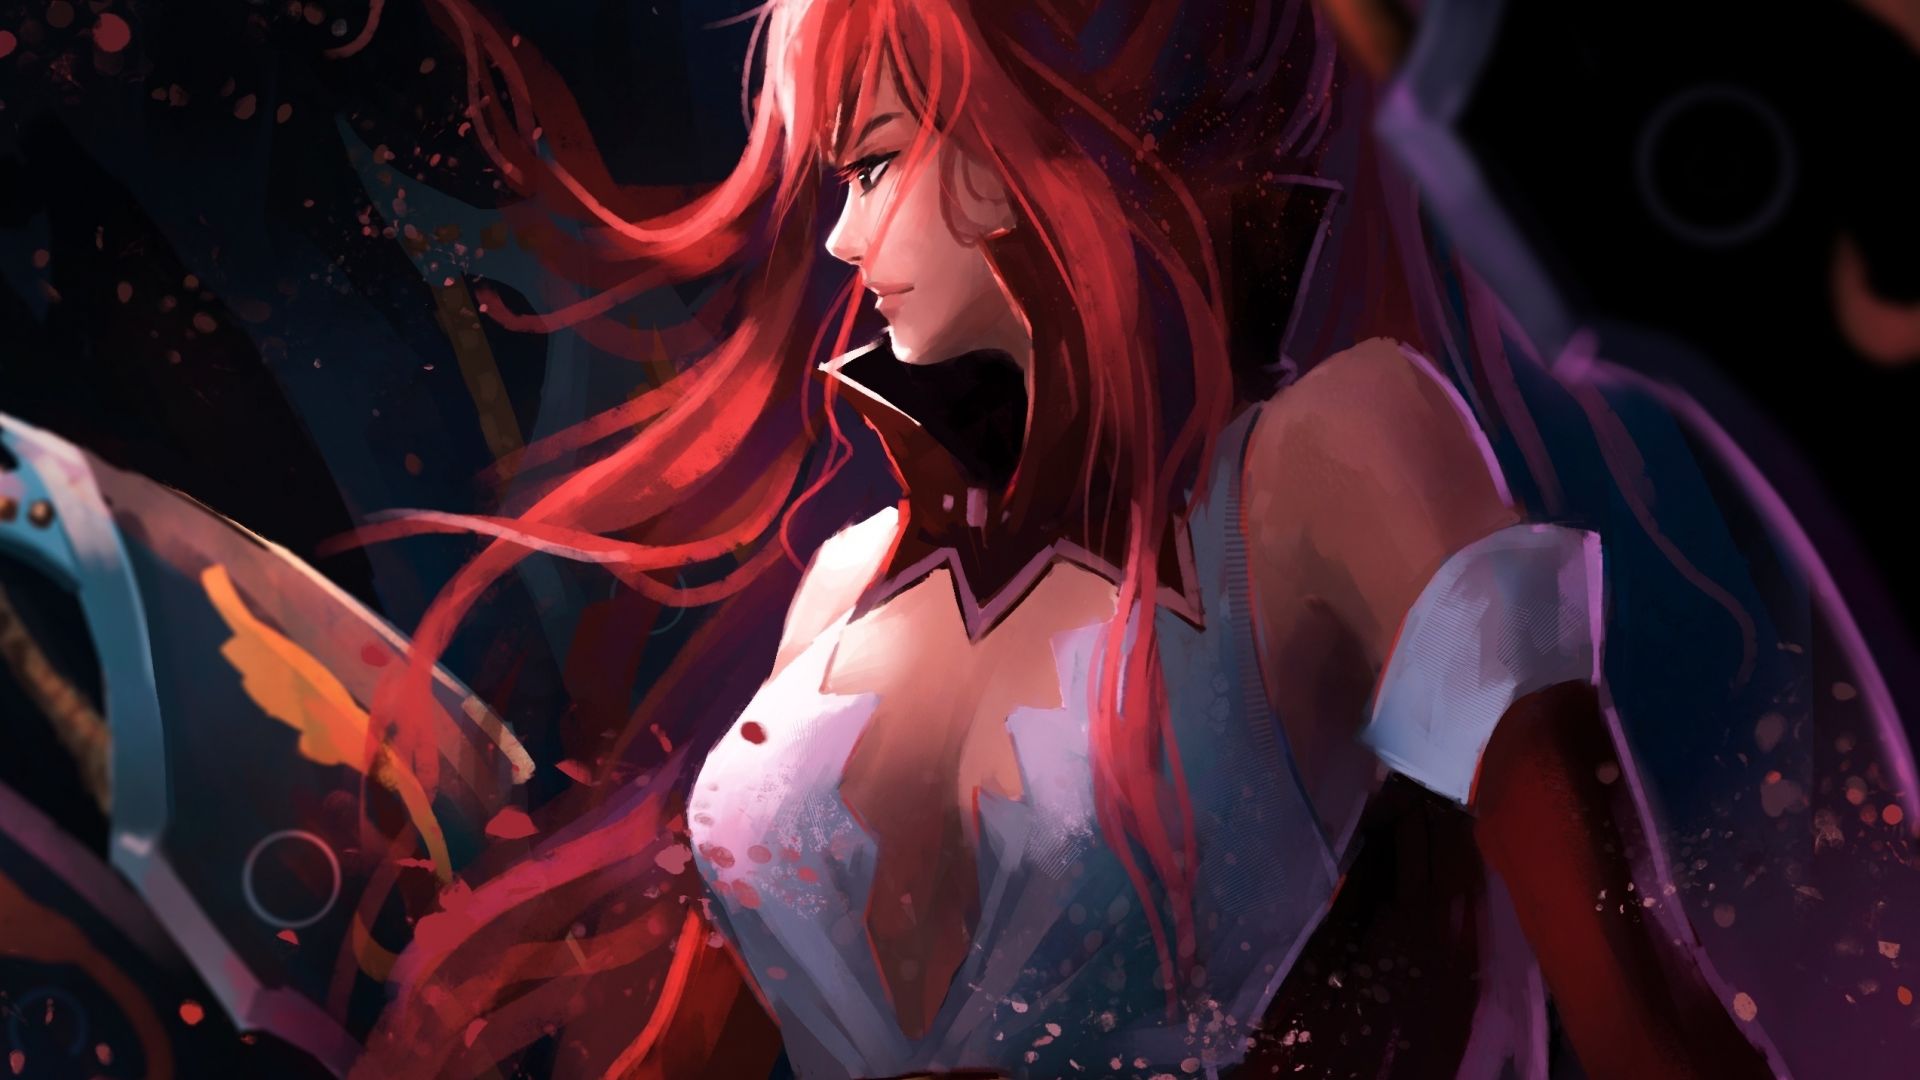 Desktop wallpapers hot, redhead anime girl, erza scarlet, hd image, picture...